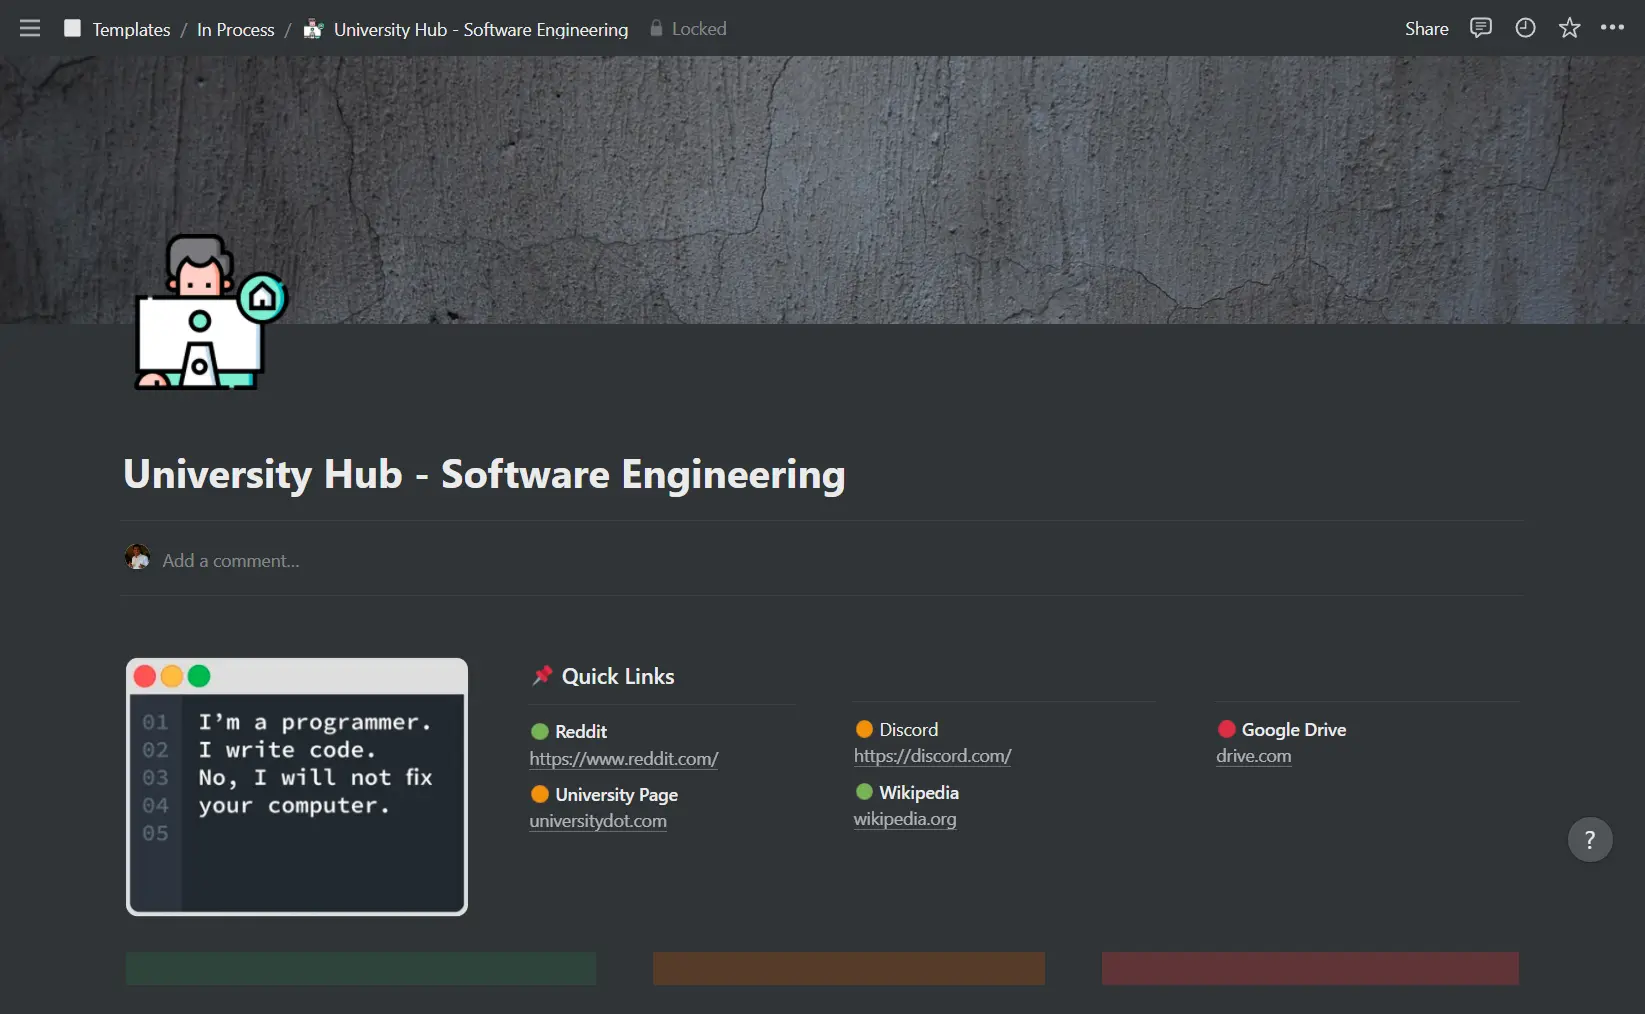 University Hub Template for Software Engineering image